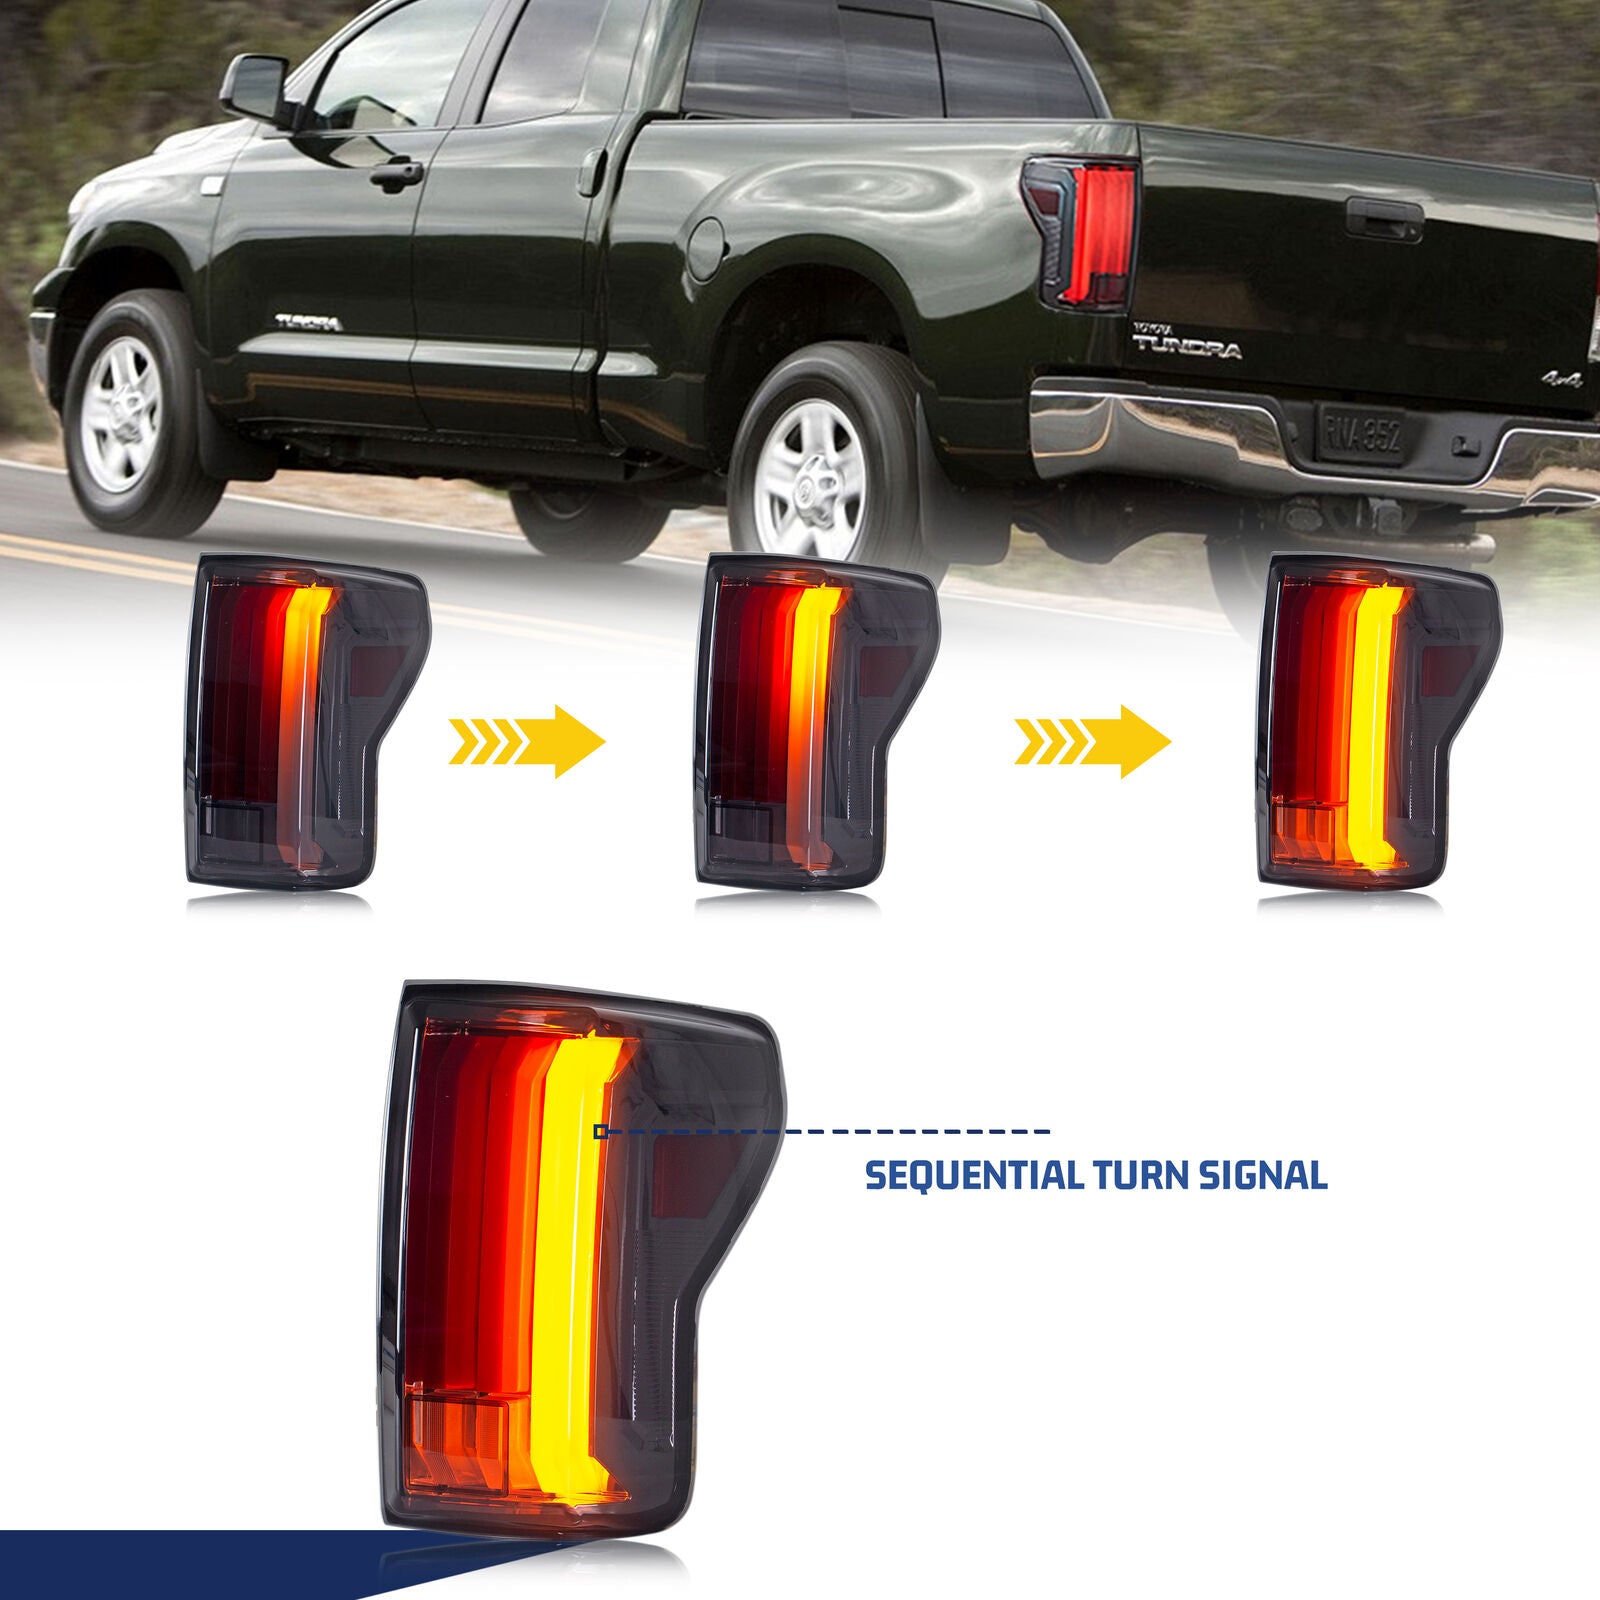 inginuity time LED Tail Lights For Toyota Tundra 2007-2013 Sequential  Smoked Start-up Animation Rear Lamps